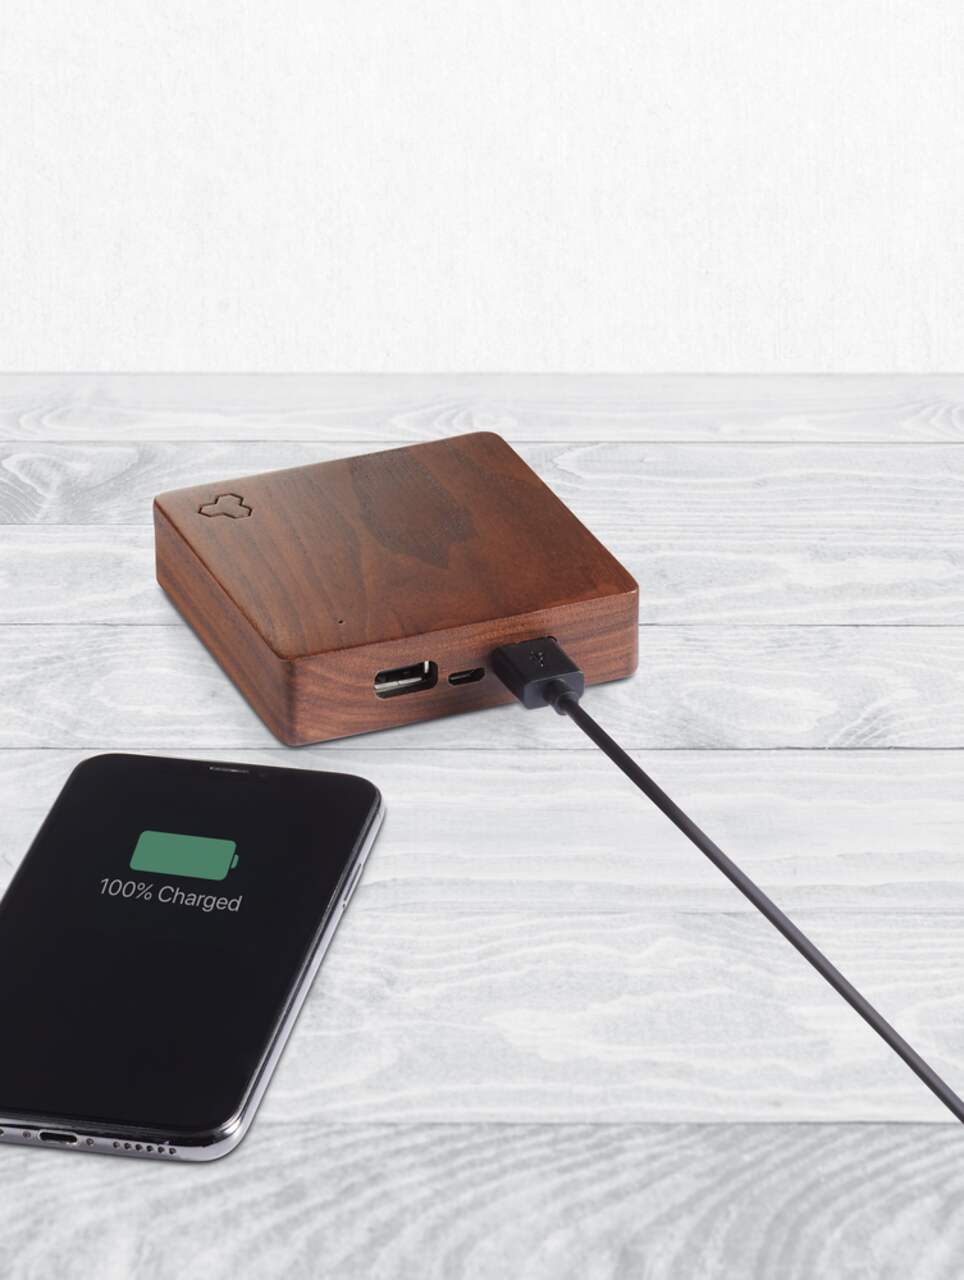 Bluehive 2-in-1 Bamboo Wireless Charging Pad with Desktop Tray